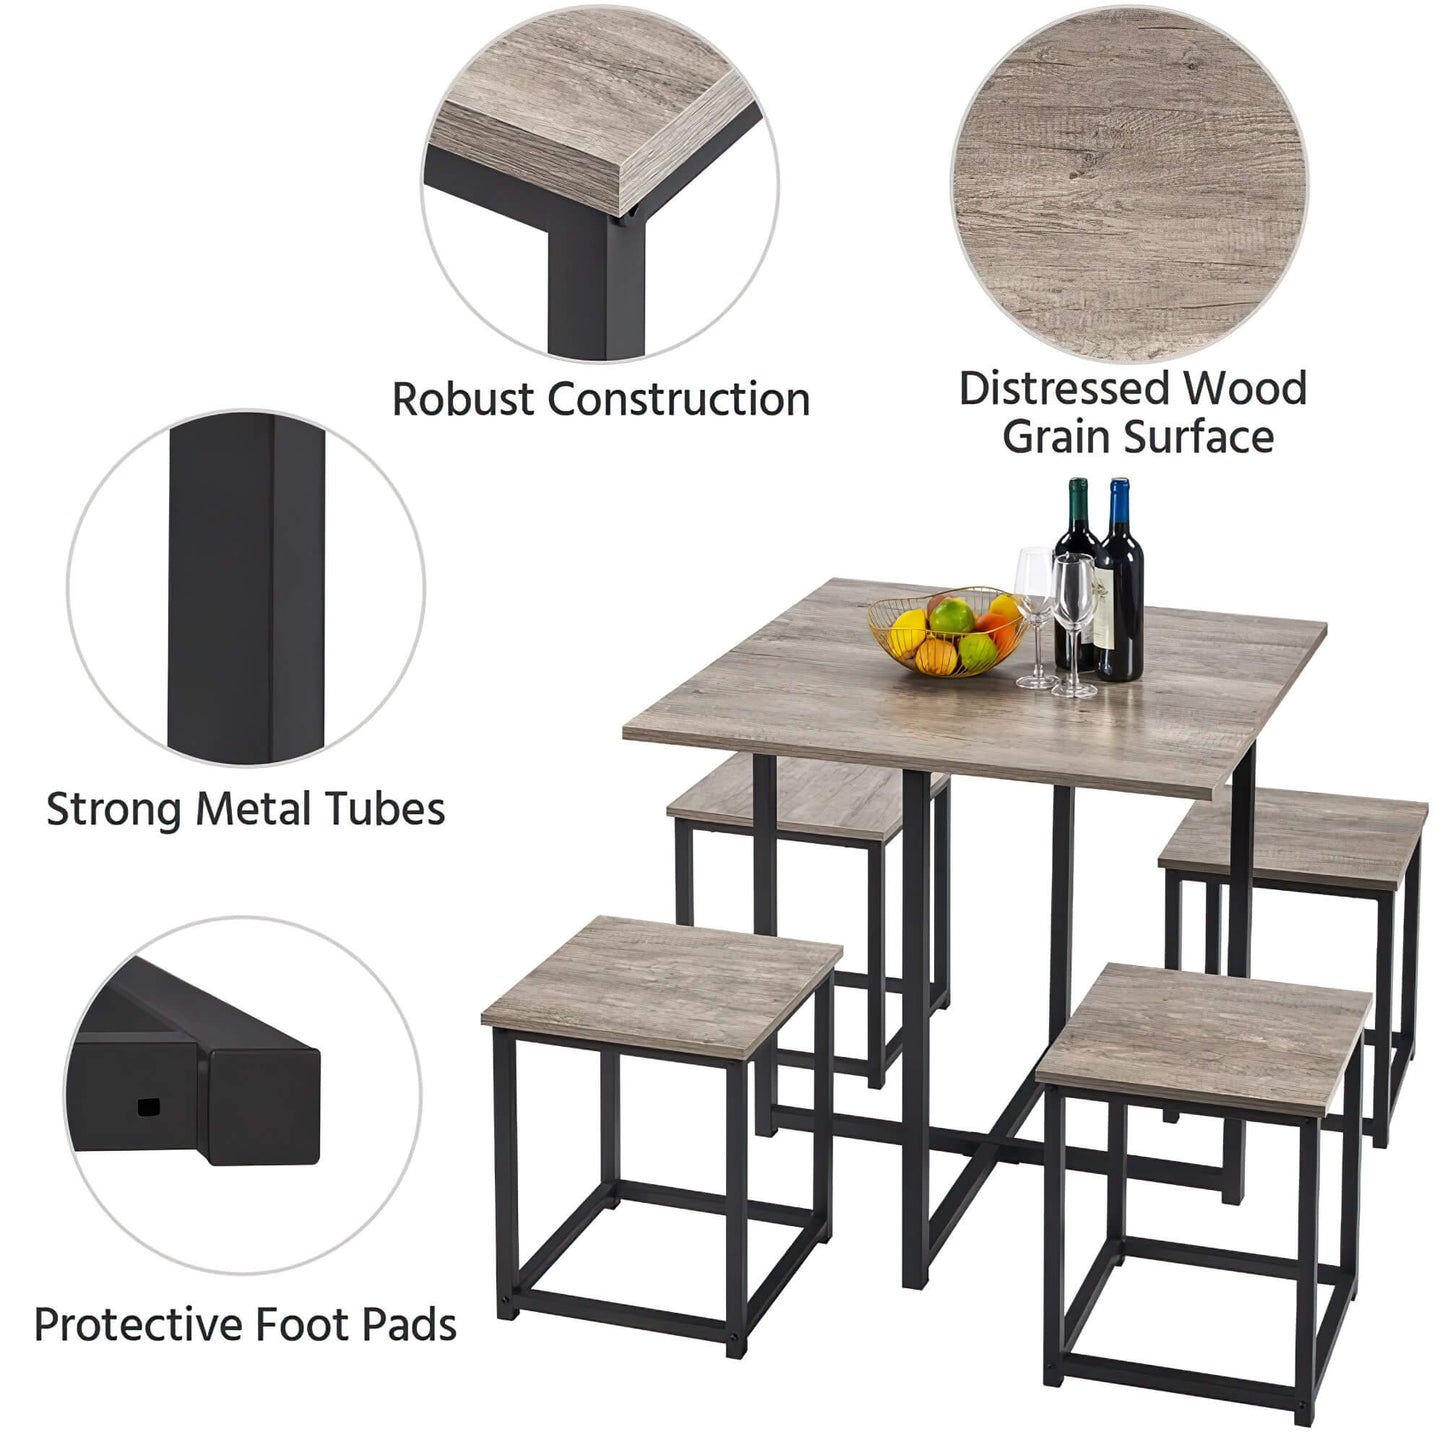 Stylish & Space-Efficient WETA 5 Piece Dining Set with Square Table 4 Backless Stools